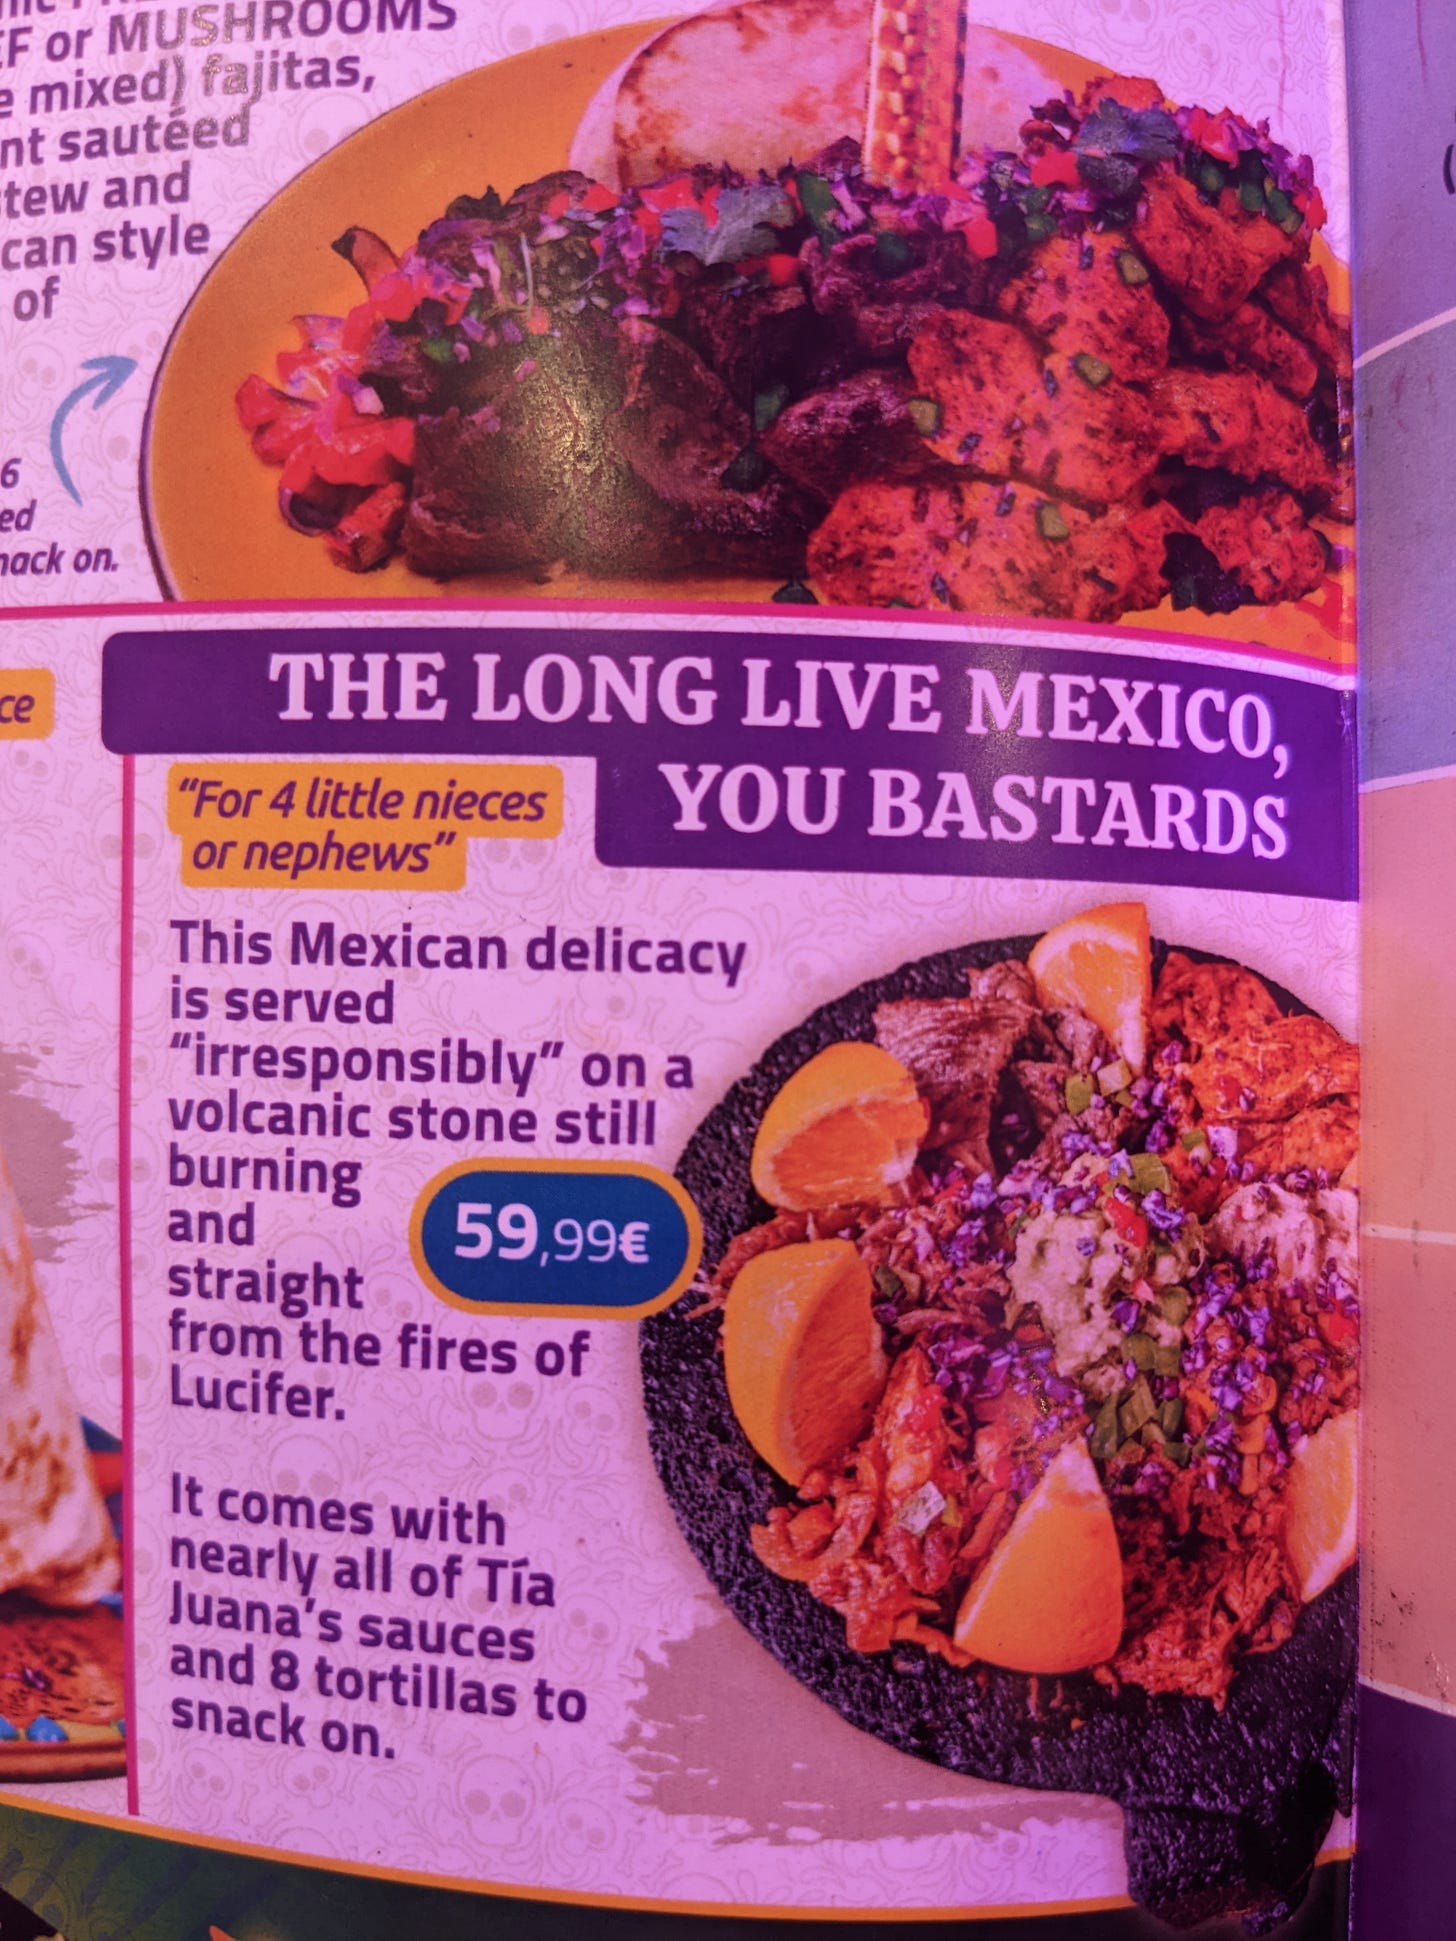 photo of a menu item: The Long Live Mexico, you Bastards! (for 4 little nieces or nephews): This Mexican delicacy is served “irresponsibly” on a volcanic stone still burning and straight from the fires of Lucifer. It comes with nearly all of Tia Juana’s sauces and 8 tortillas to snack on.